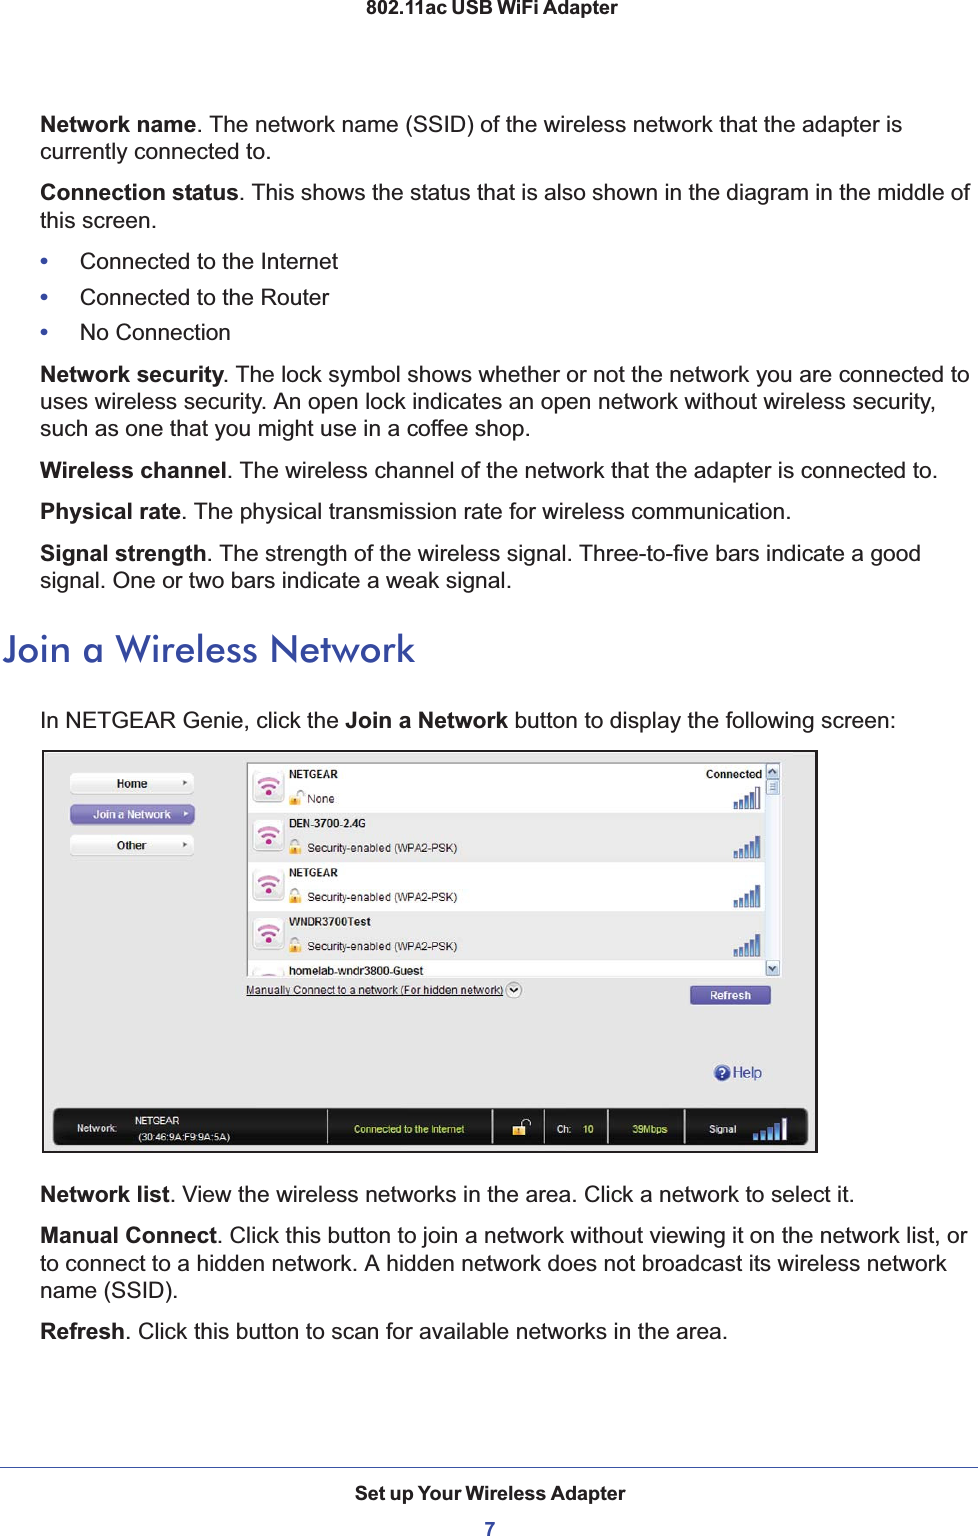 Set up Your Wireless Adapter7 802.11ac USB WiFi AdapterNetwork name. The network name (SSID) of the wireless network that the adapter is currently connected to.Connection status. This shows the status that is also shown in the diagram in the middle of this screen.•     Connected to the Internet•     Connected to the Router•     No ConnectionNetwork security. The lock symbol shows whether or not the network you are connected to uses wireless security. An open lock indicates an open network without wireless security, such as one that you might use in a coffee shop.Wireless channel. The wireless channel of the network that the adapter is connected to.Physical rate. The physical transmission rate for wireless communication.Signal strength. The strength of the wireless signal. Three-to-five bars indicate a good signal. One or two bars indicate a weak signal. Join a Wireless NetworkIn NETGEAR Genie, click the Join a Network button to display the following screen:Network list. View the wireless networks in the area. Click a network to select it. Manual Connect. Click this button to join a network without viewing it on the network list, or to connect to a hidden network. A hidden network does not broadcast its wireless network name (SSID). Refresh. Click this button to scan for available networks in the area.